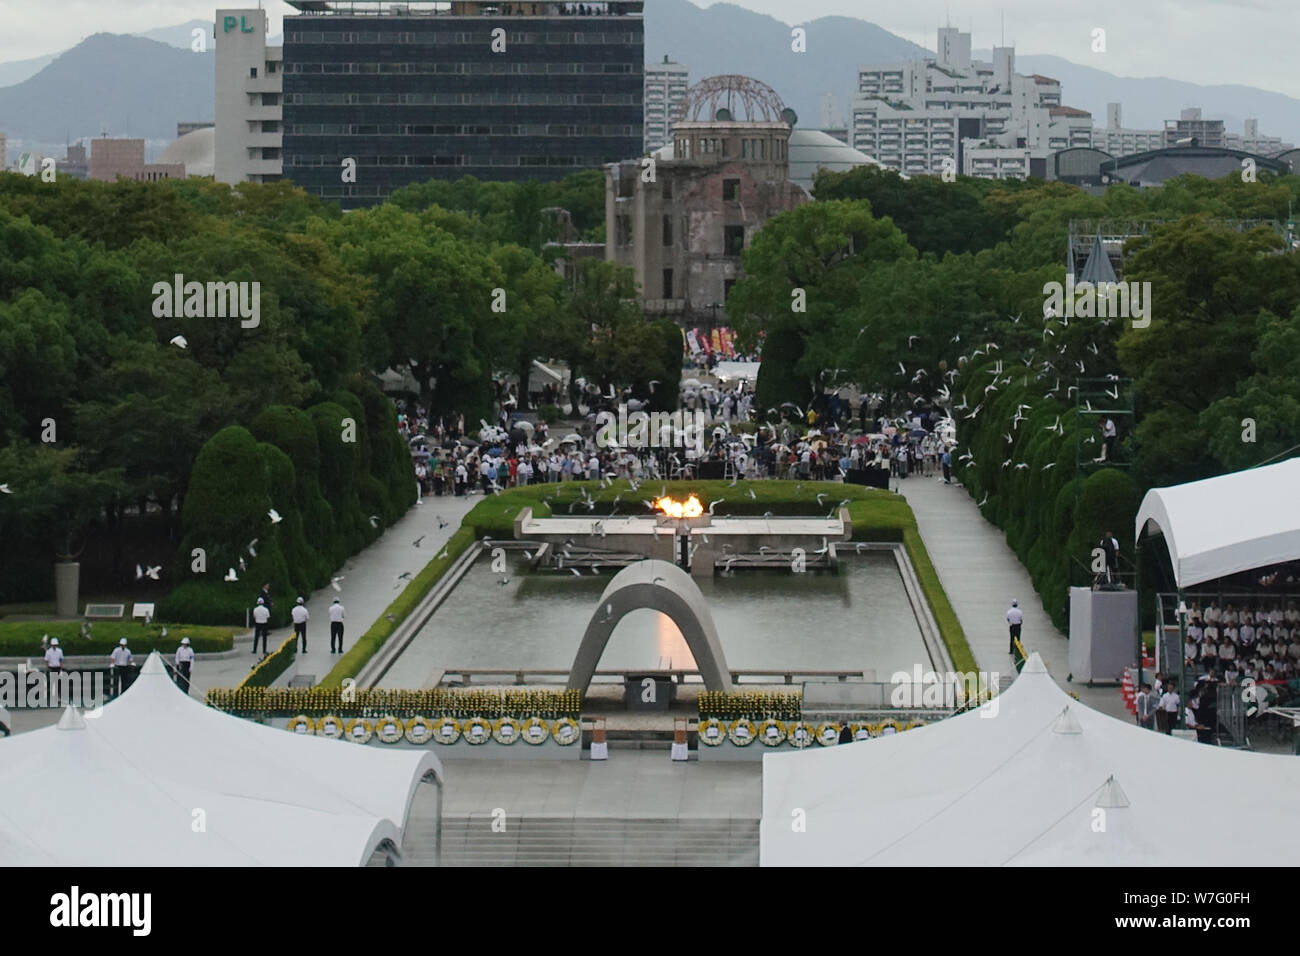 Hiroshima, Japan. 6th Aug, 2019. People attend an annual memorial ceremony in Hiroshima, Japan, Aug. 6, 2019. Hiroshima, a Japanese city hit by a U.S. atomic bomb at the end of World War II, marked the 74th anniversary of the bombing on Tuesday. Credit: Peng Chun/Xinhua/Alamy Live News Stock Photo